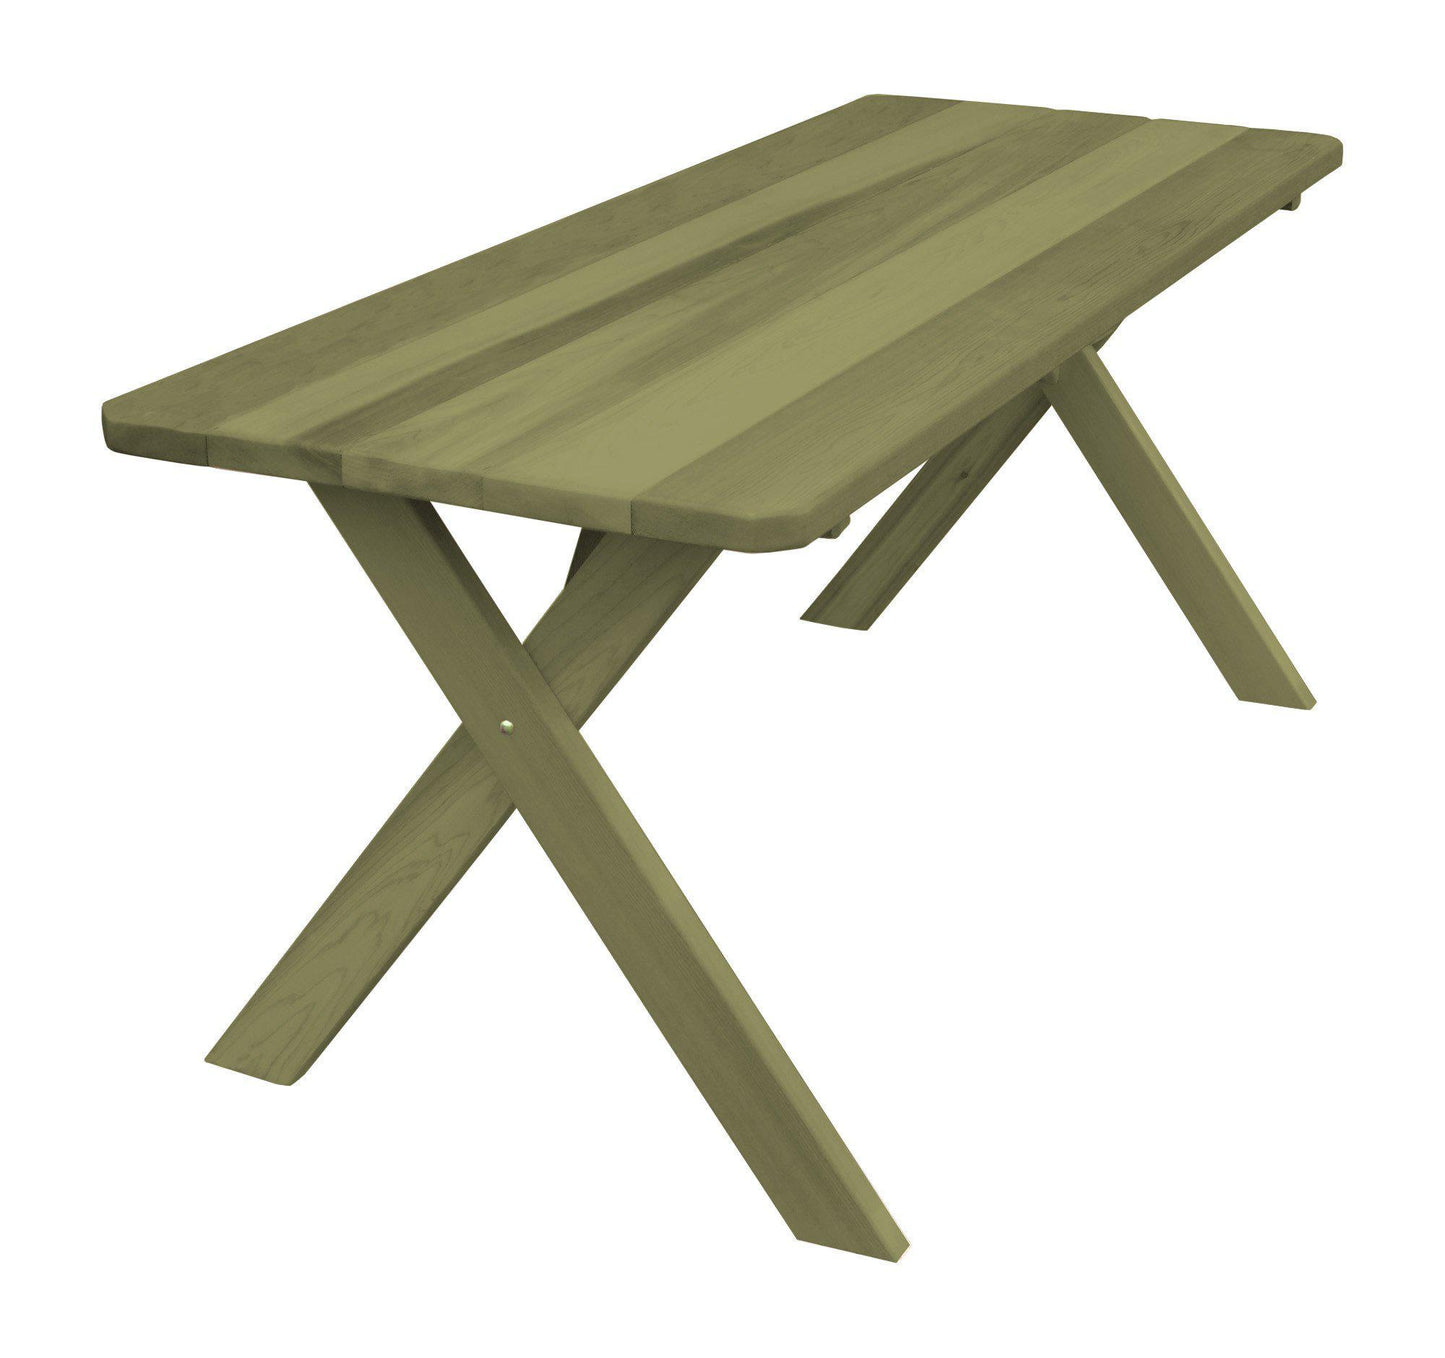 A&L FURNITURE CO. Western Red Cedar 70" Cross-leg Table Only - Specify for FREE 2" Umbrella Hole - LEAD TIME TO SHIP 4 WEEKS OR LESS